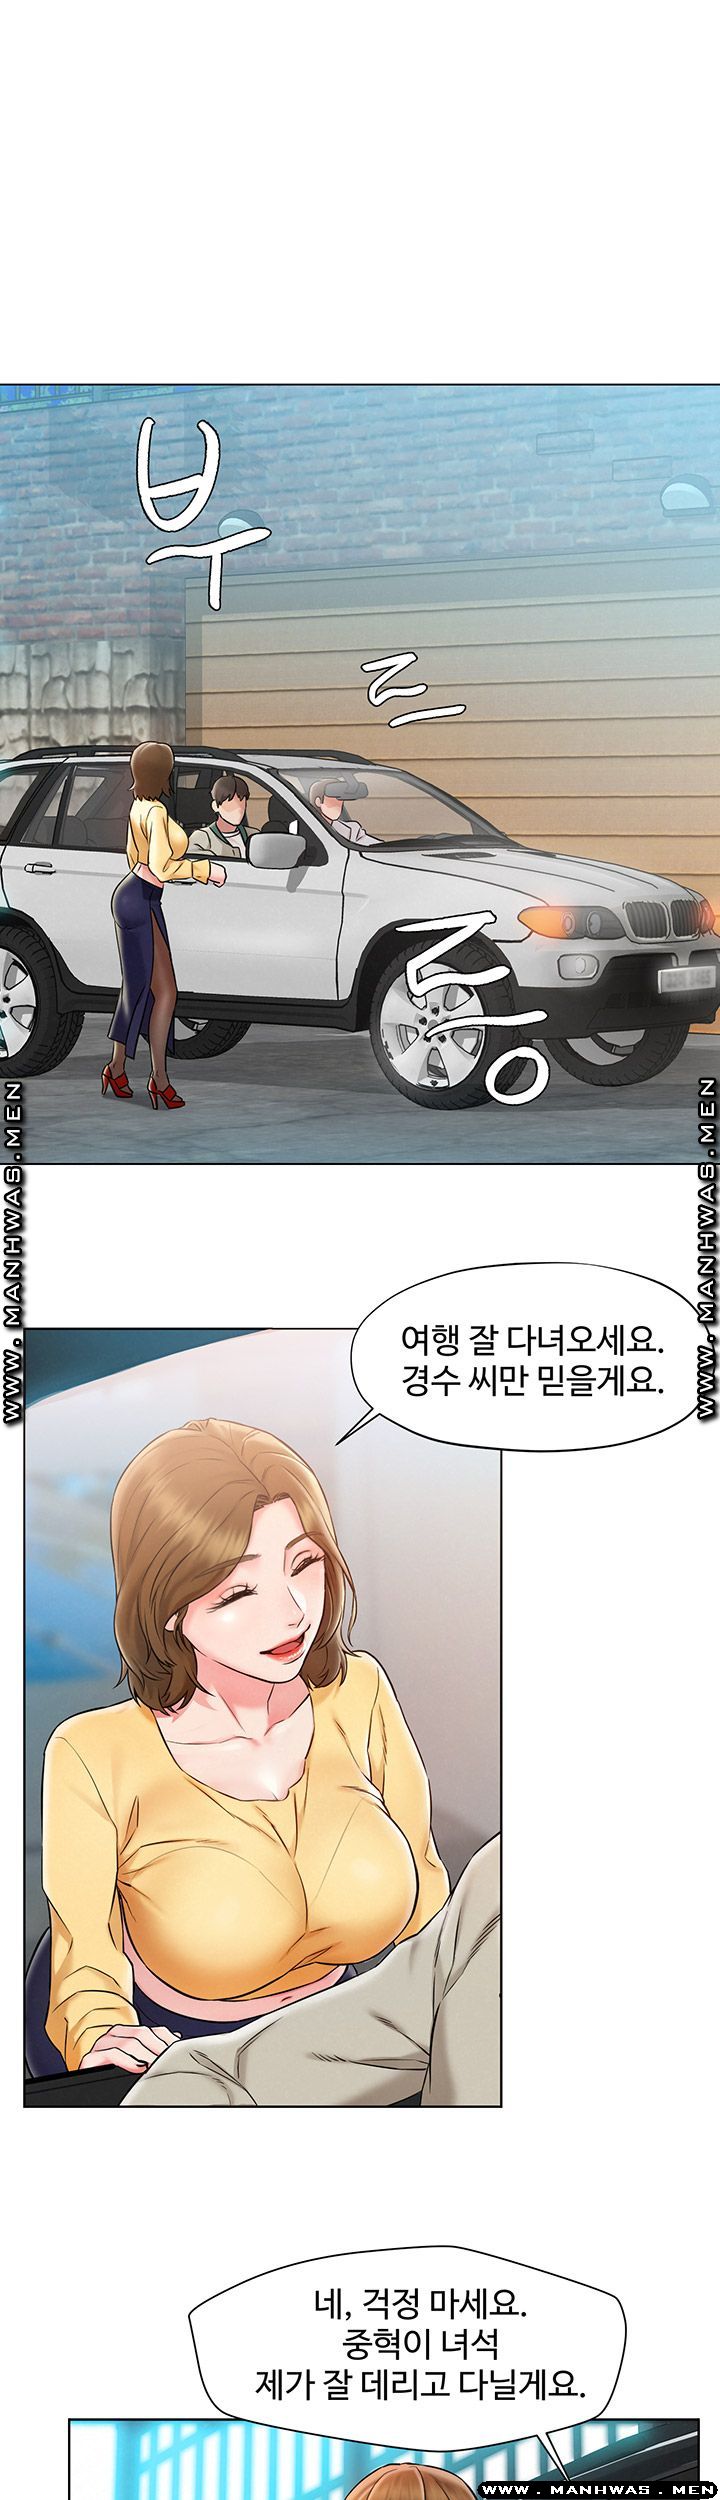 Affair Travel Raw - Chapter 1 Page 15